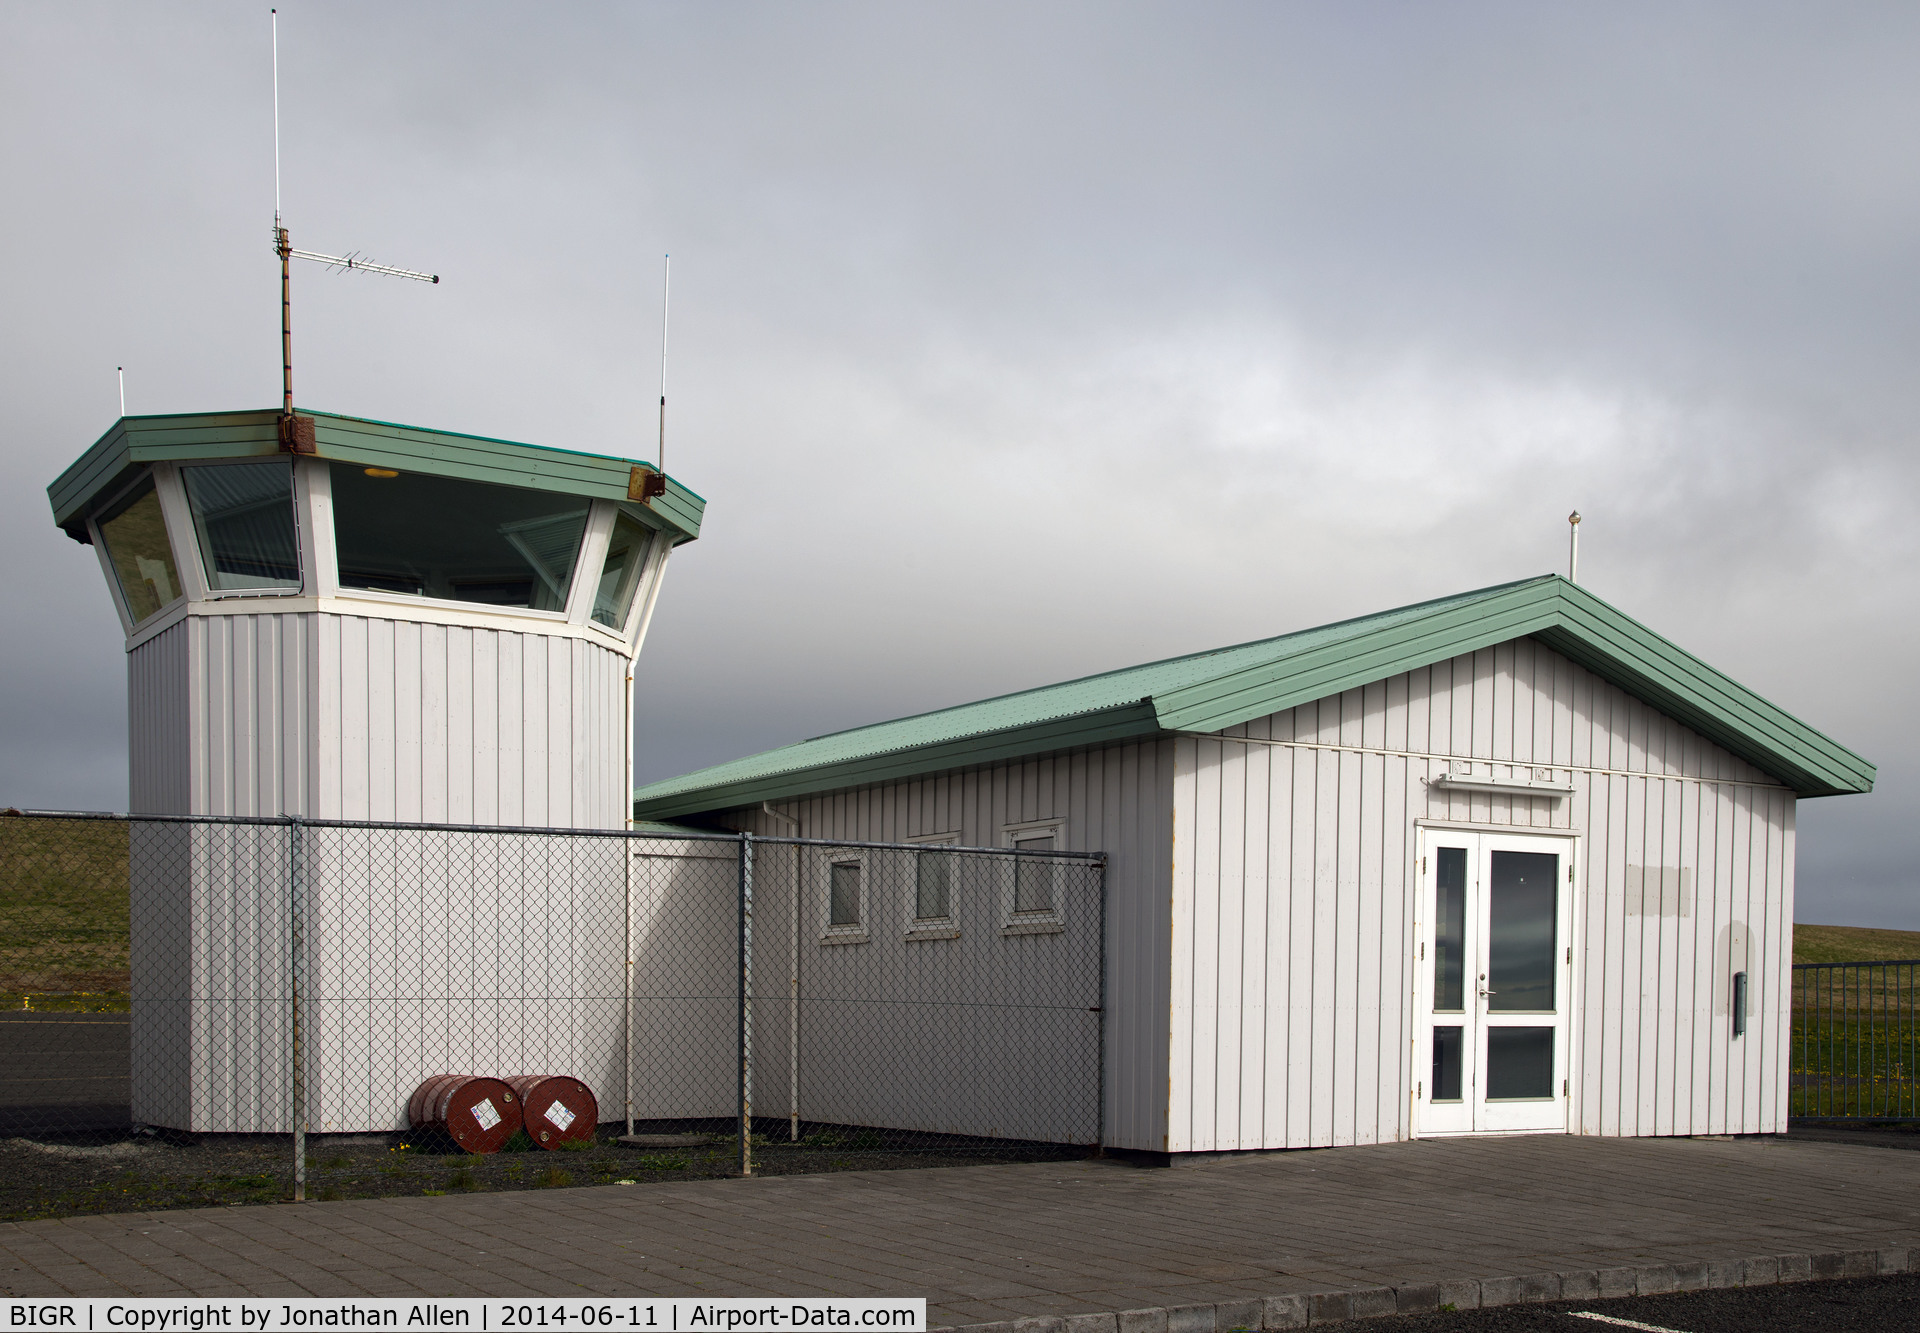 Grimsey Airport, Grimsey Iceland (BIGR) - Airport waiting room and control tower.